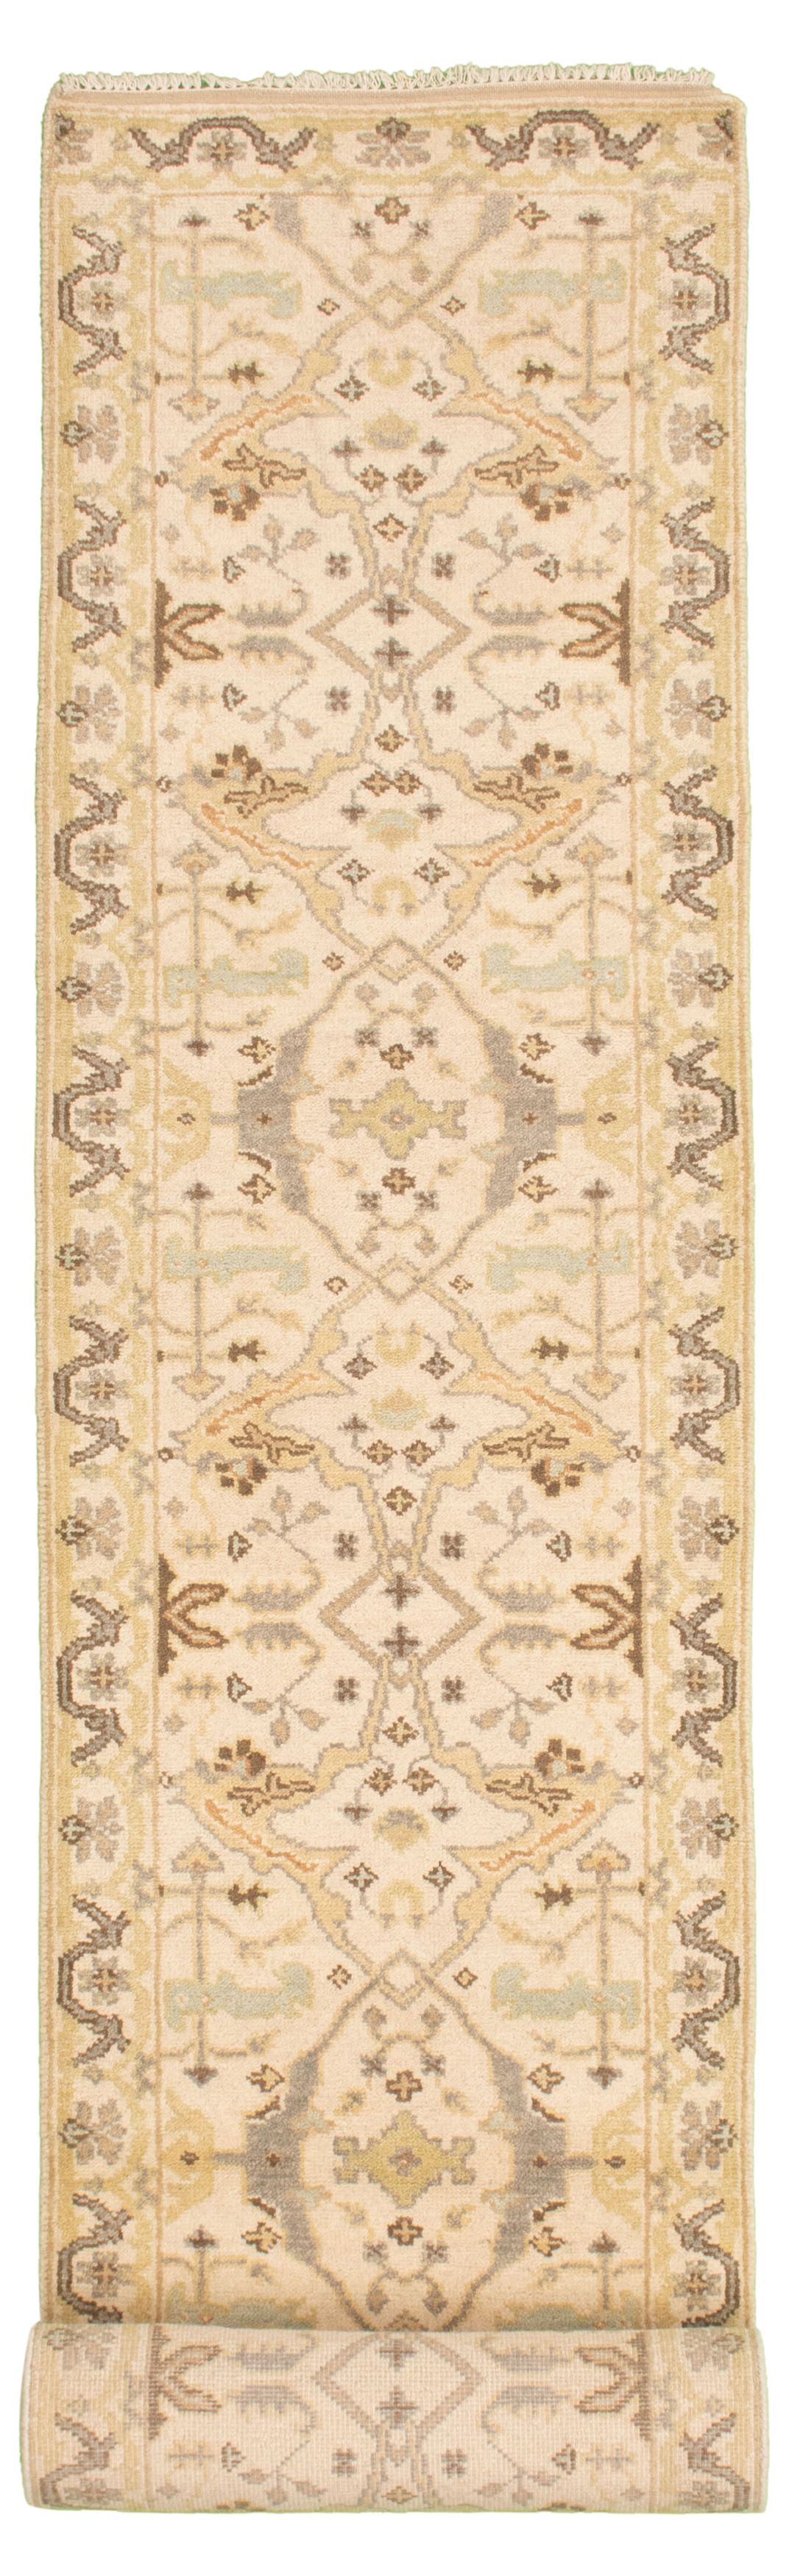 Hand-knotted Royal Ushak Beige Wool Rug 2'8" x 15'10" Size: 2'8" x 15'10"  